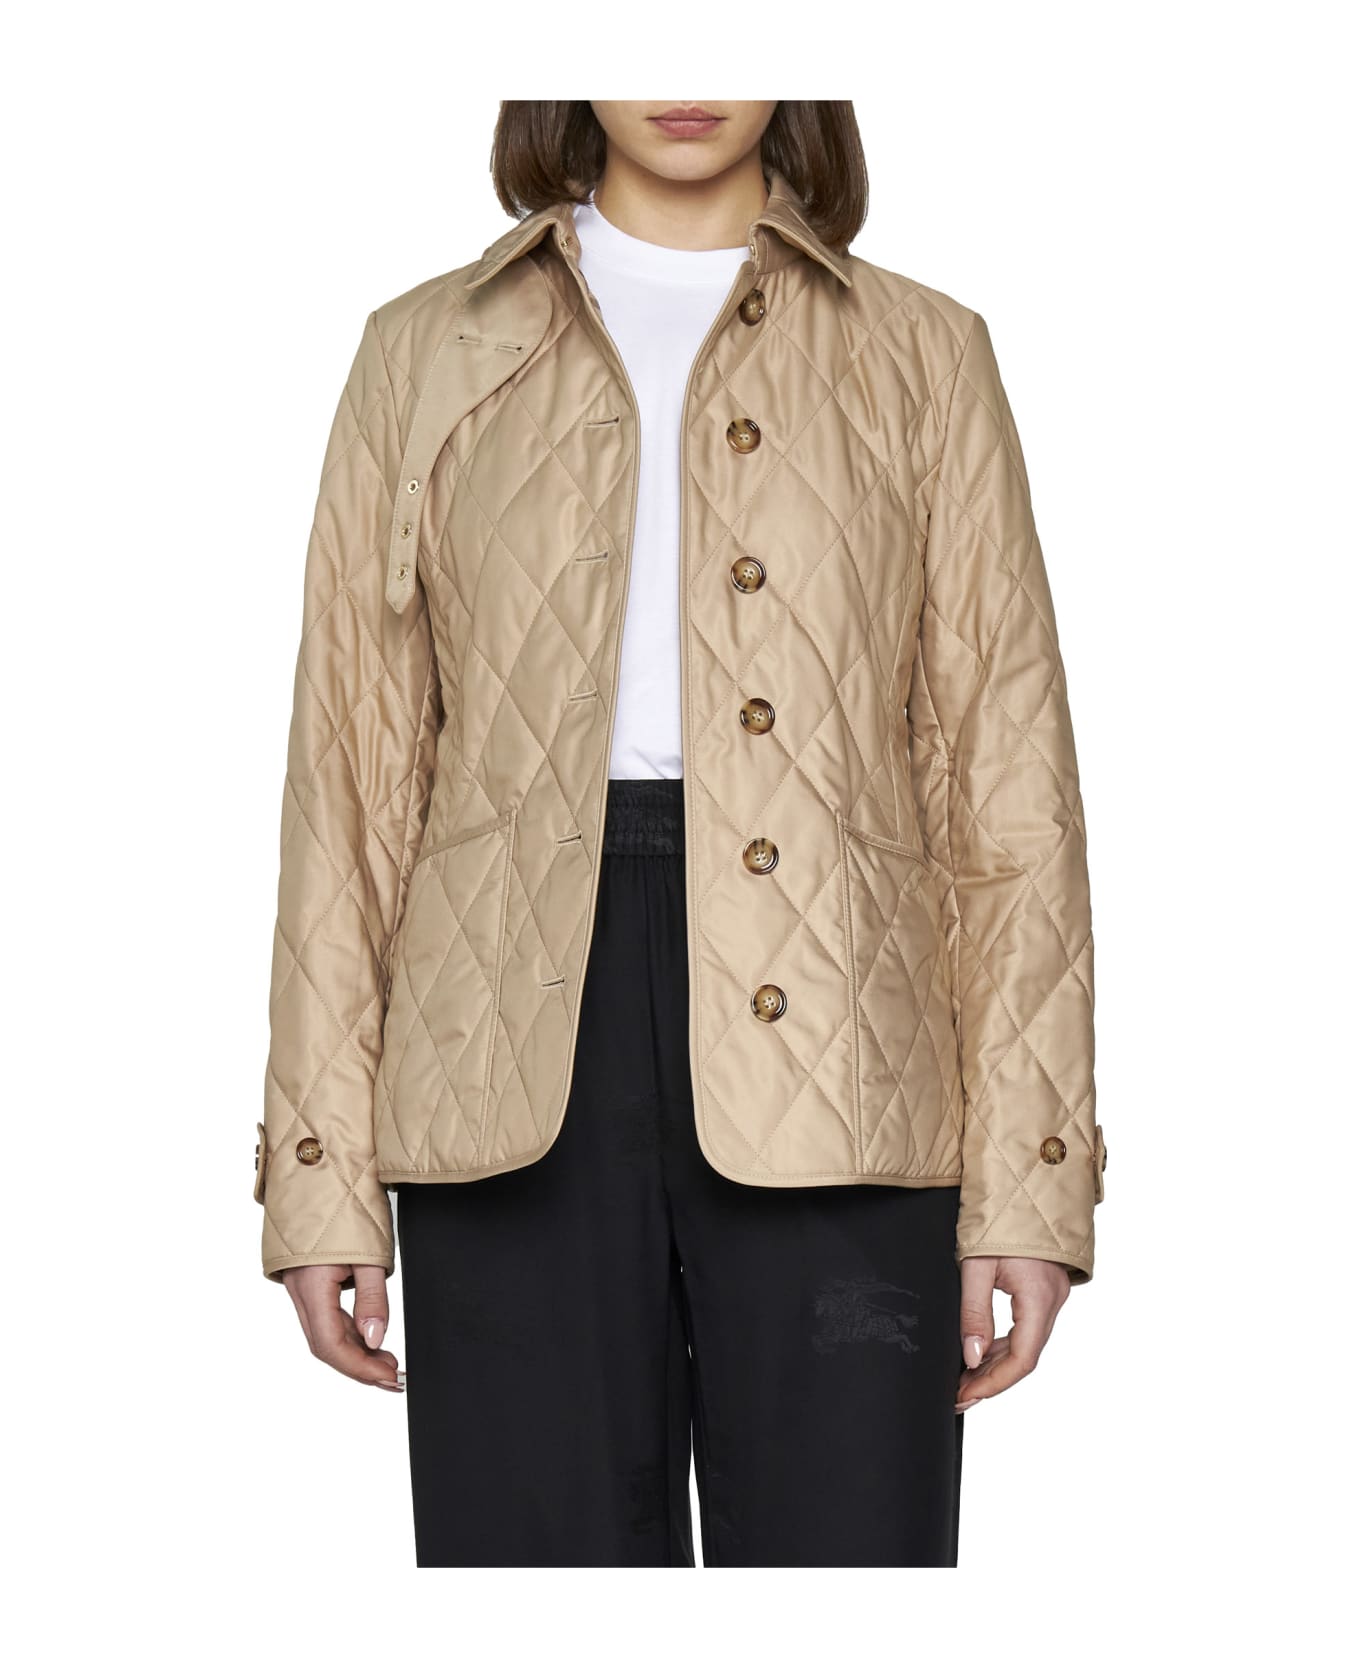 Burberry Diamond Quilted Jacket - New chino